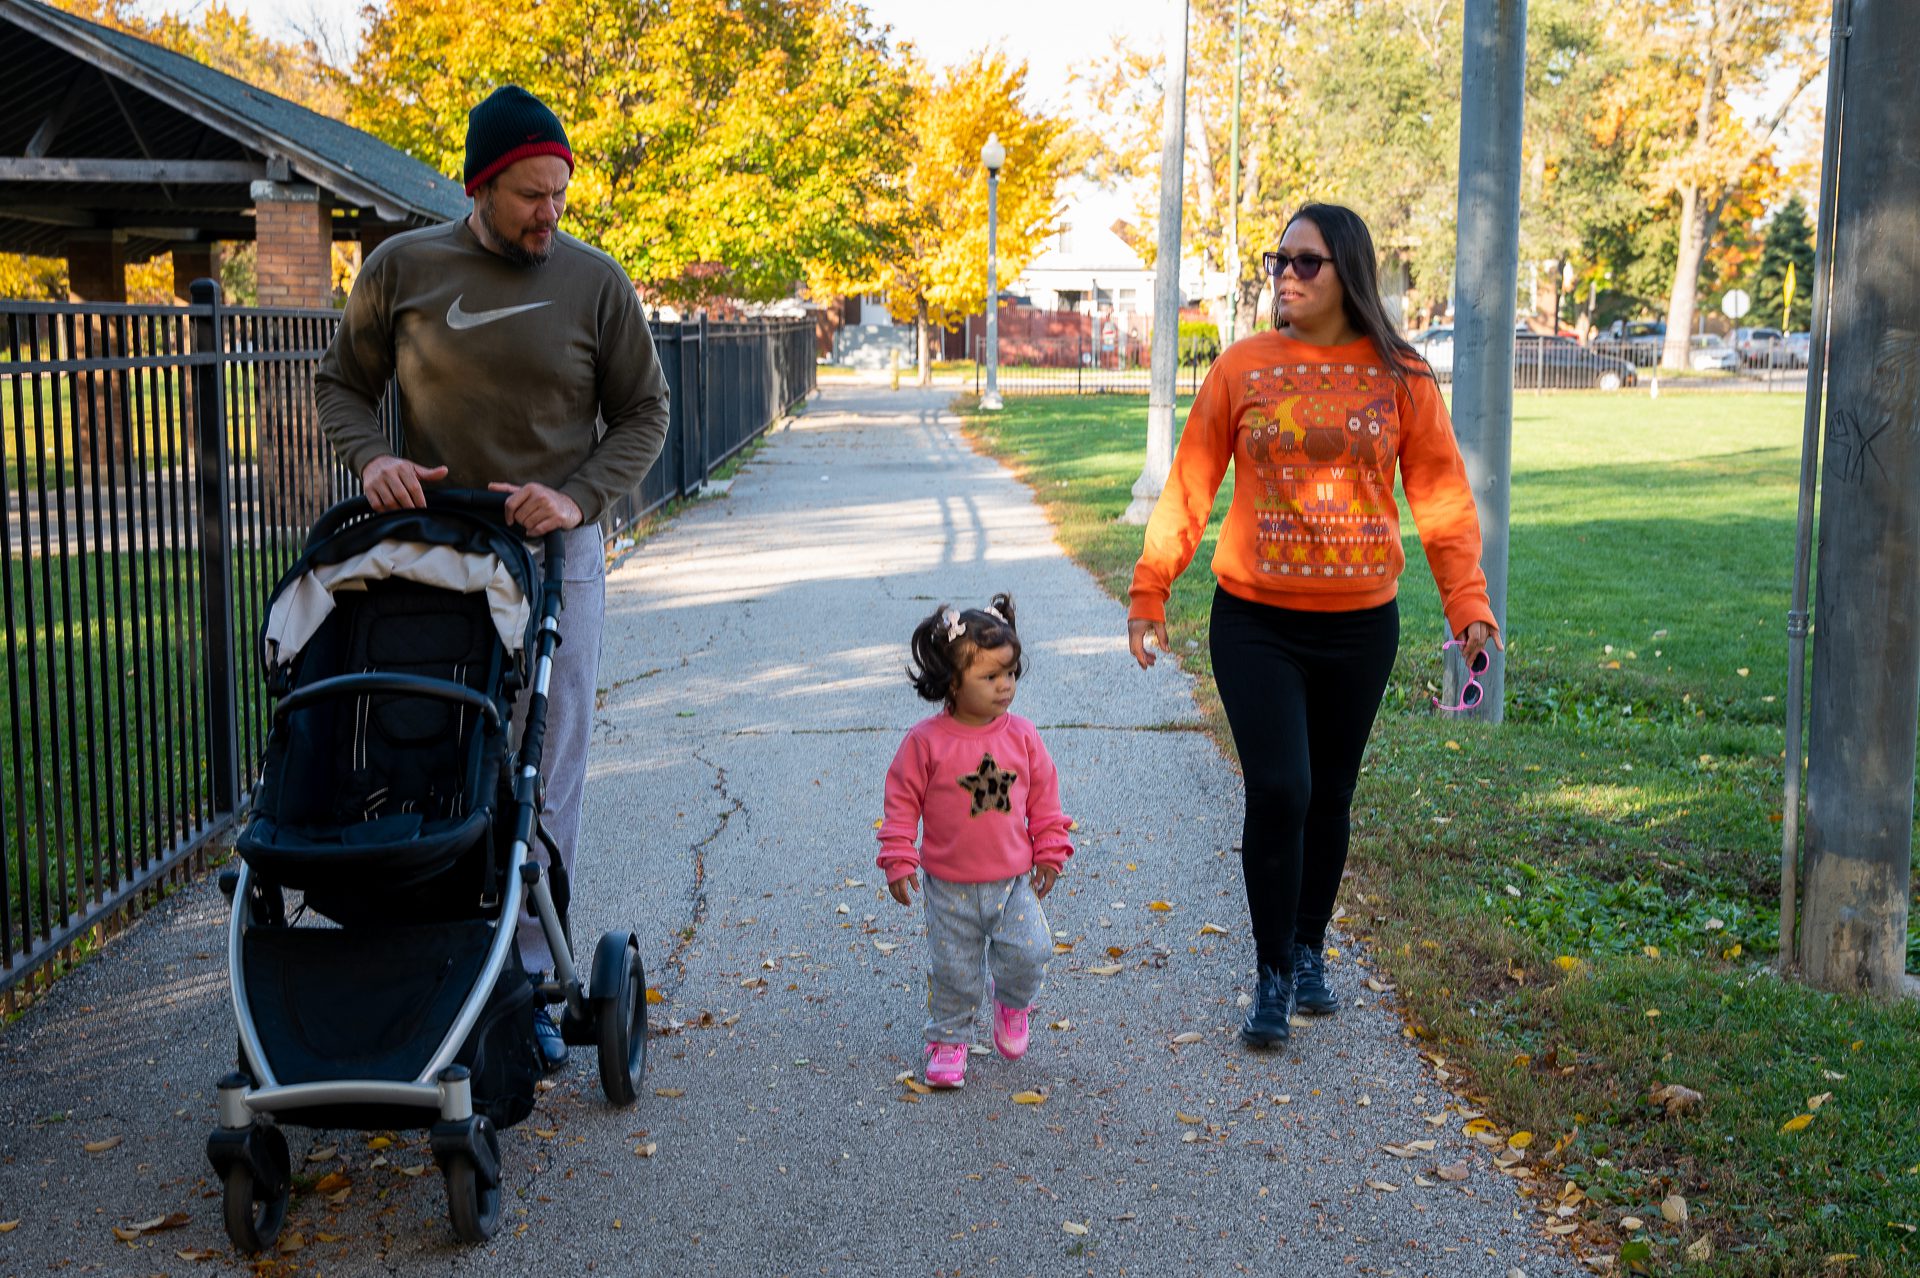 Tomas pushes the stroller while Carmen and Grecia walk, they are all on the path by the park